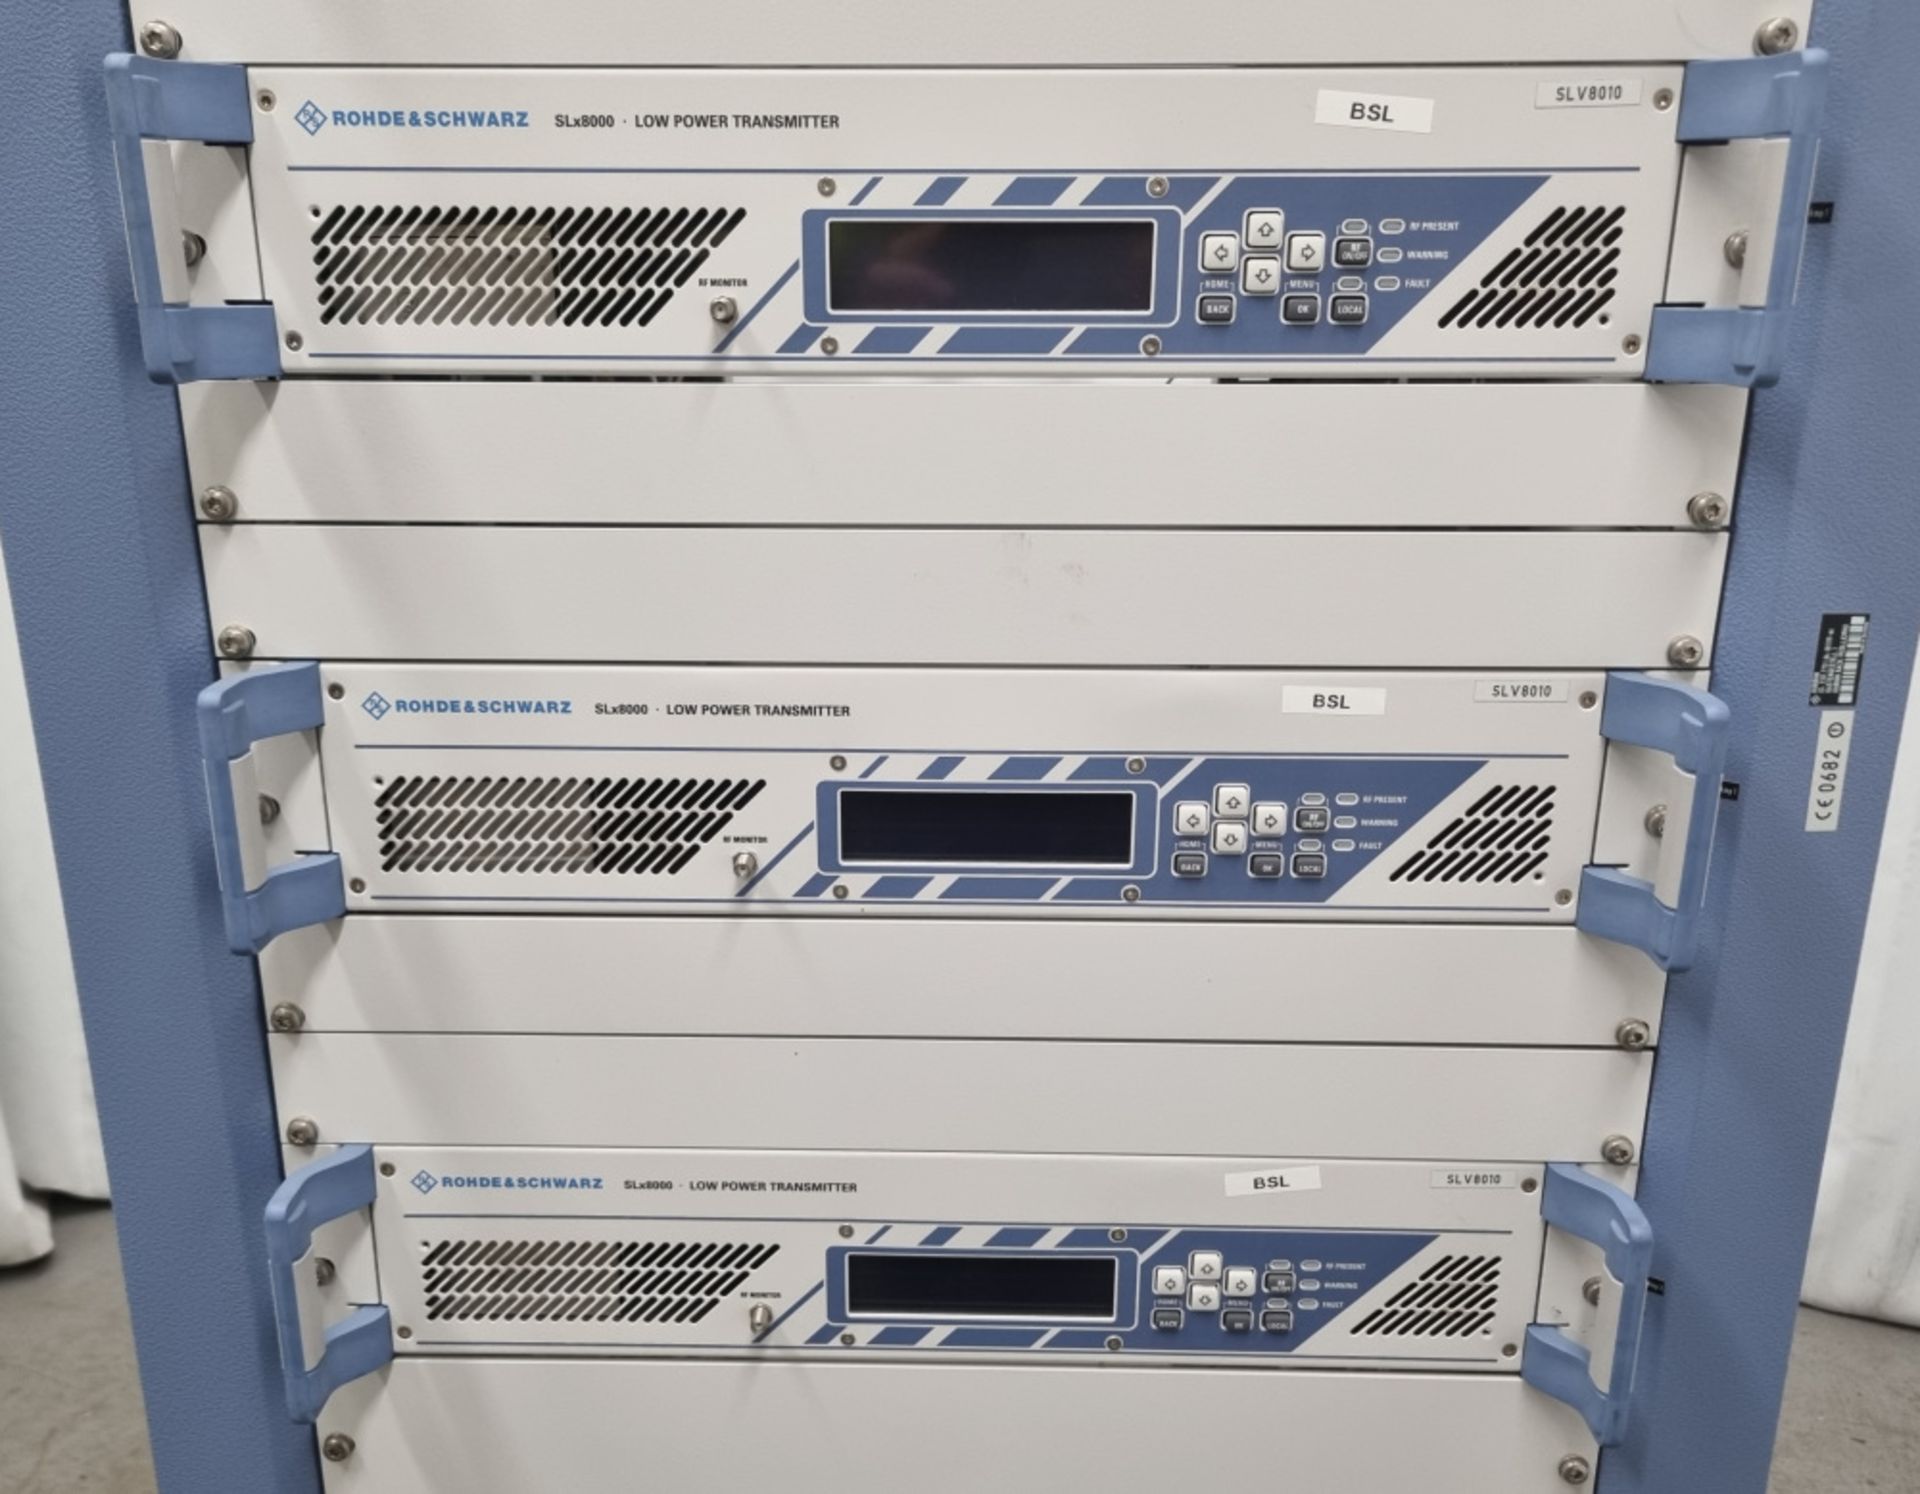 Rohde & Schwarz Racking Tower (KG800N) with 2x Spinner Switching units, Rohde & Schwarz NETCCU 800 - Image 7 of 24